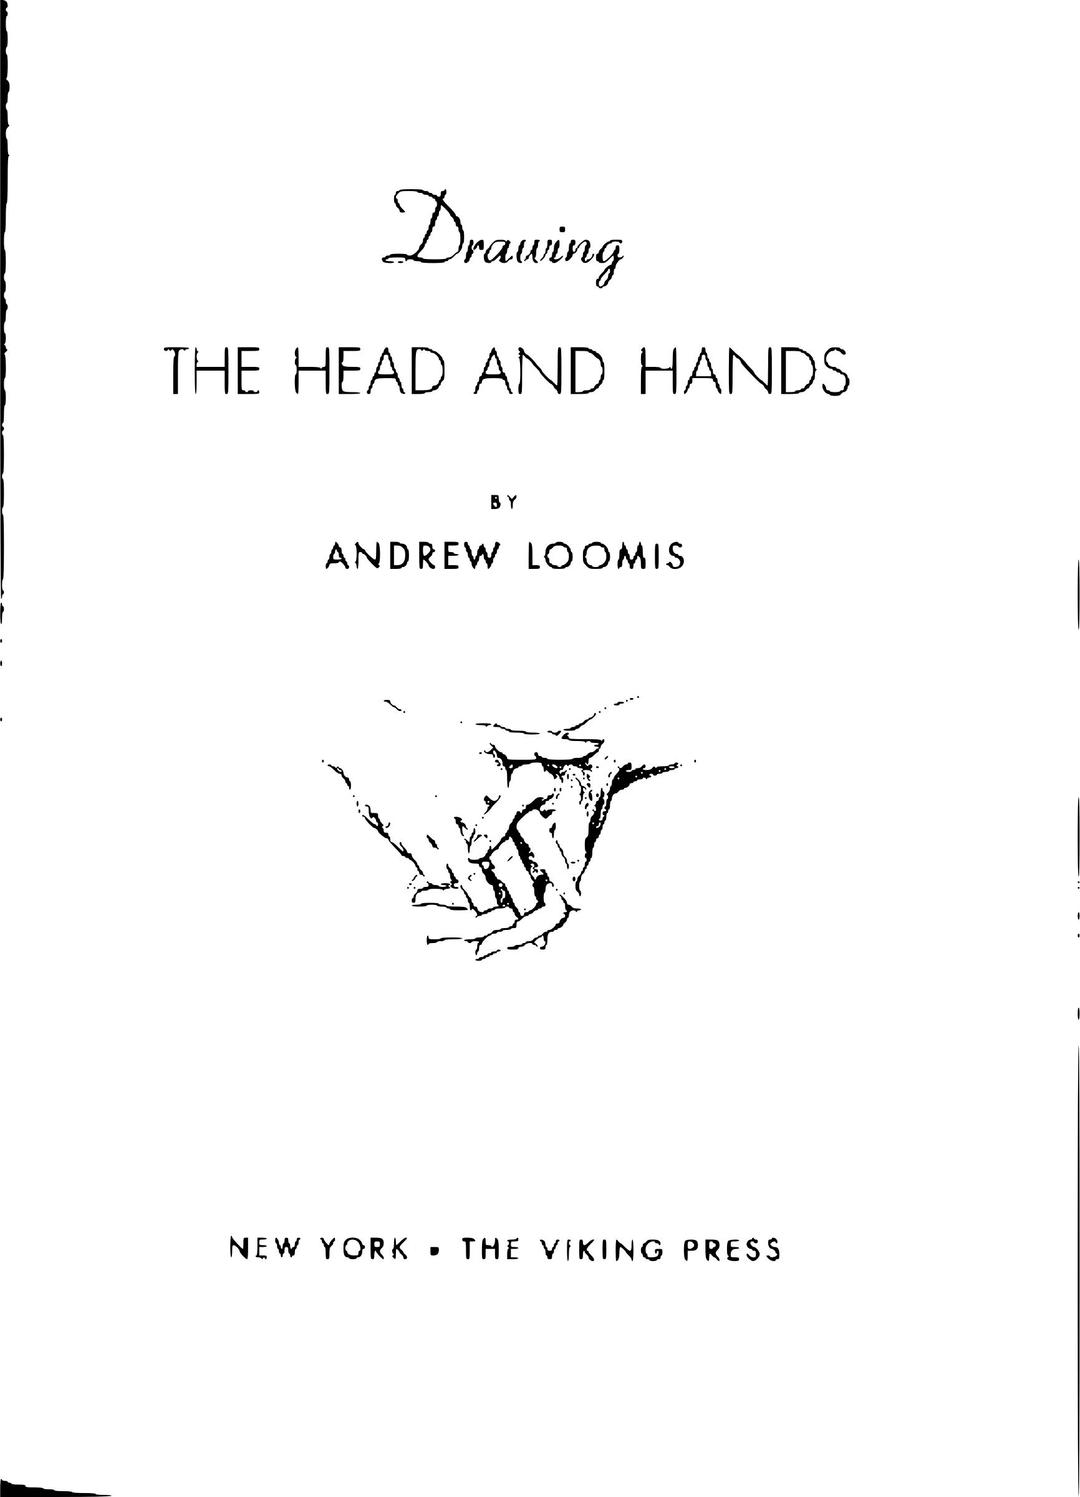 Andrew Loomis Drawing the Head and Hands (potrace) 3 png transparent